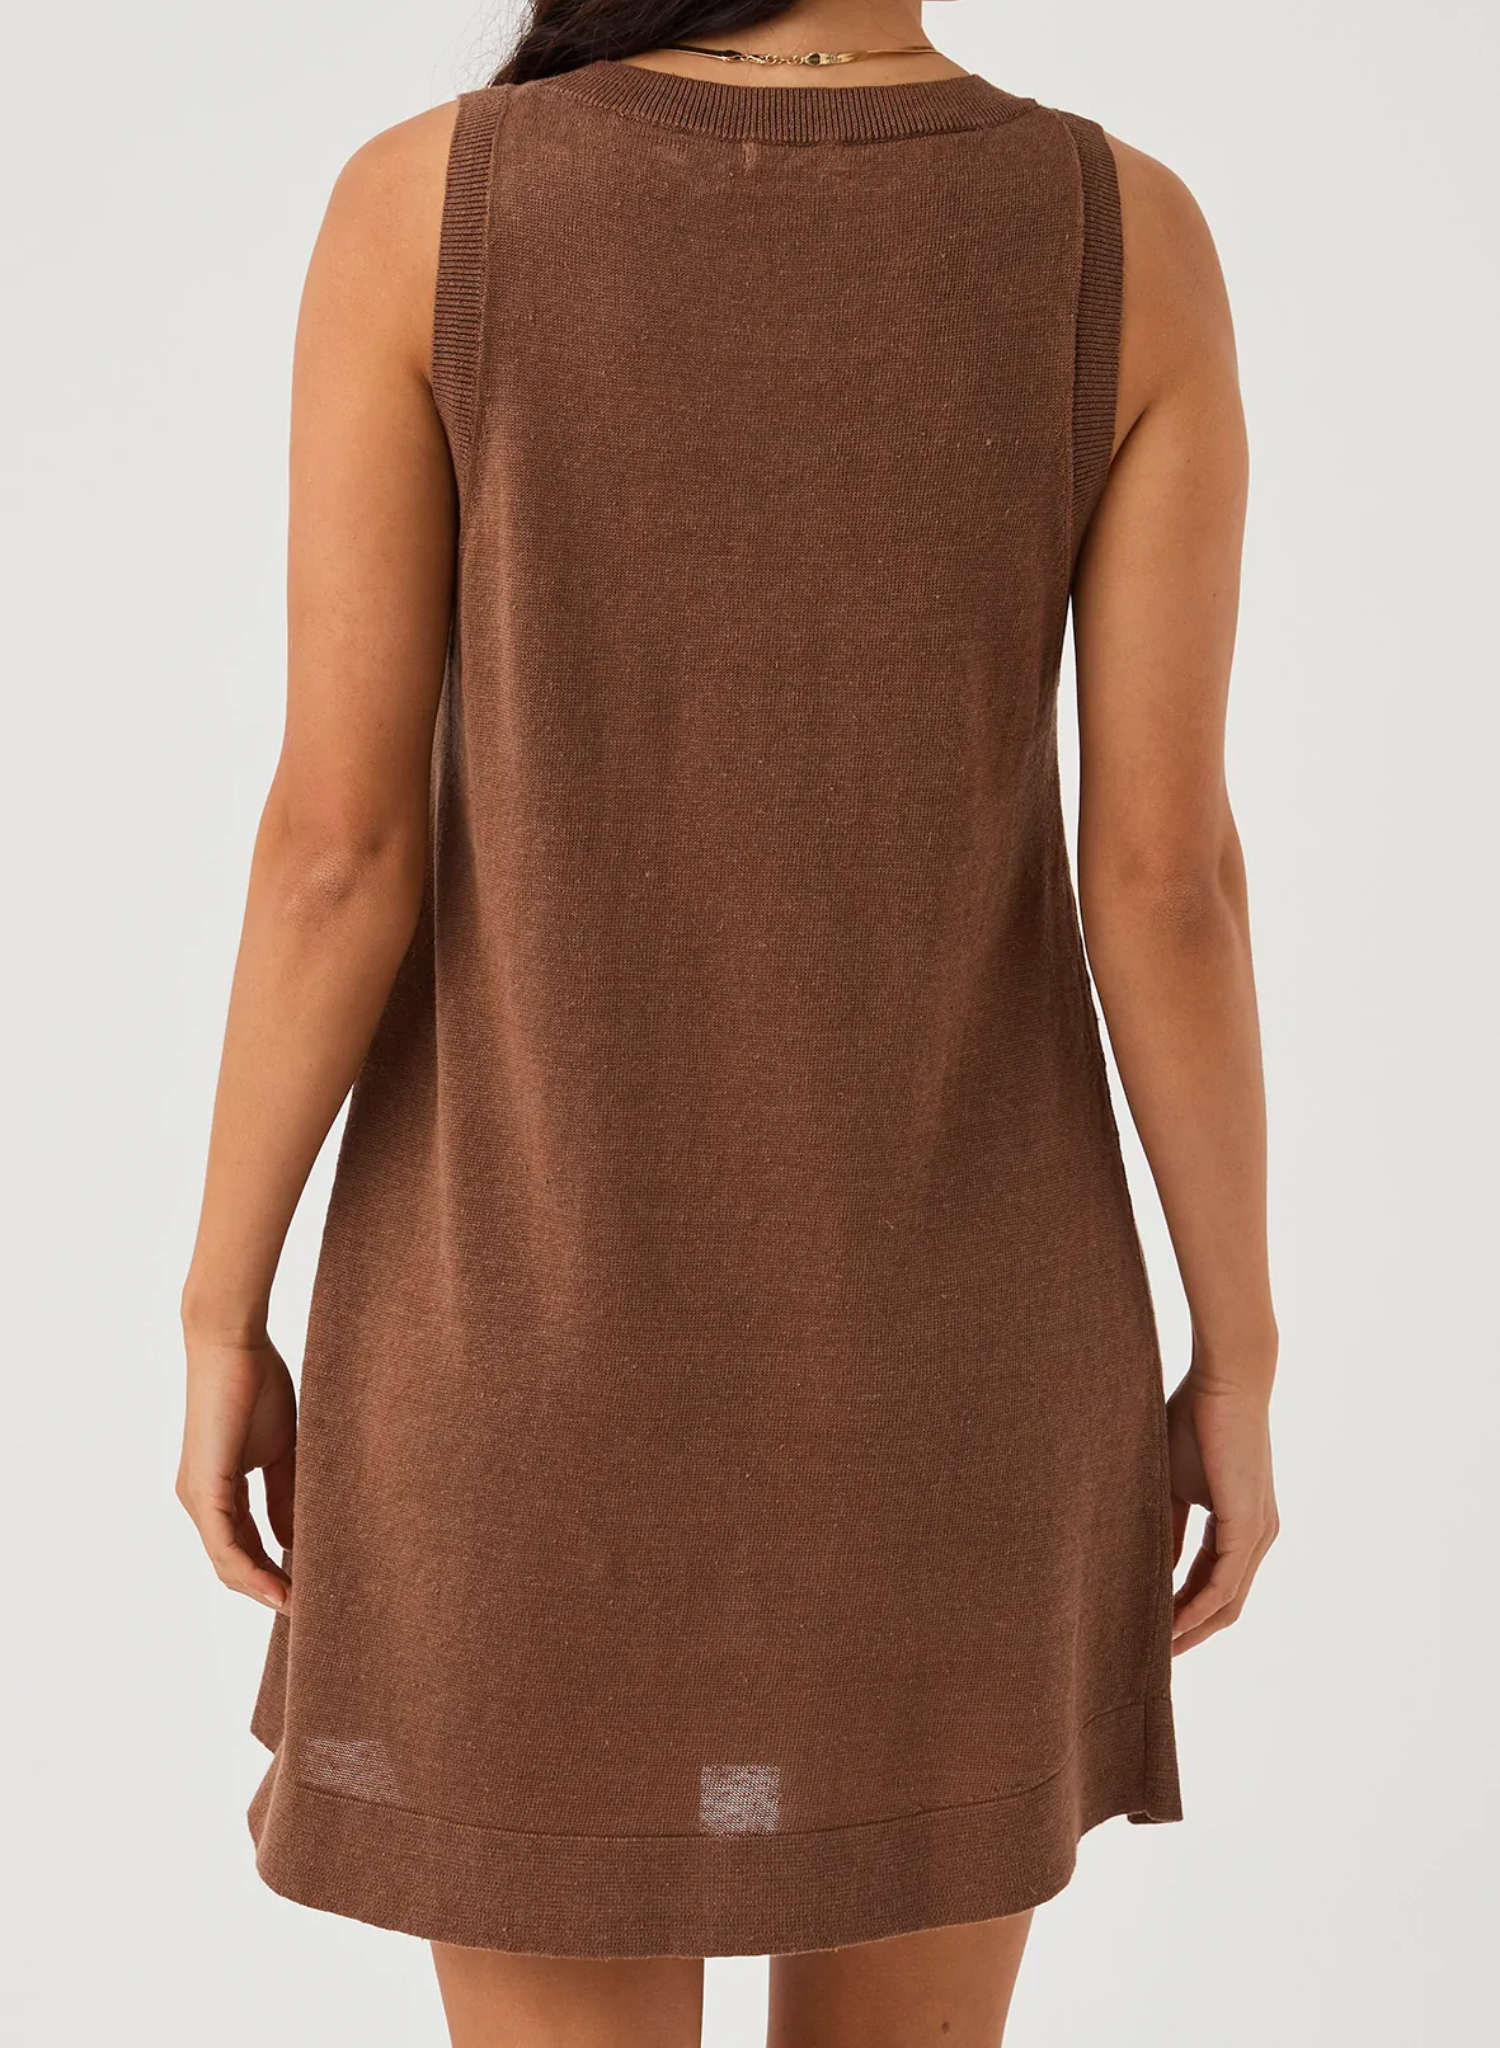 Brie Shift Dress in Chocolate. 100% Linen Knit Shift shape Wide crew neck Mini dress style Zero waste knit construction Soft hand feel Ethically produced Free of harmful chemicals : OEKO-TEX Standard 100 This piece is of 100% natural linen, carefully knitted with zero waste. With this is mind, this item appreciates good care so it can be enjoyed for seasons to come.